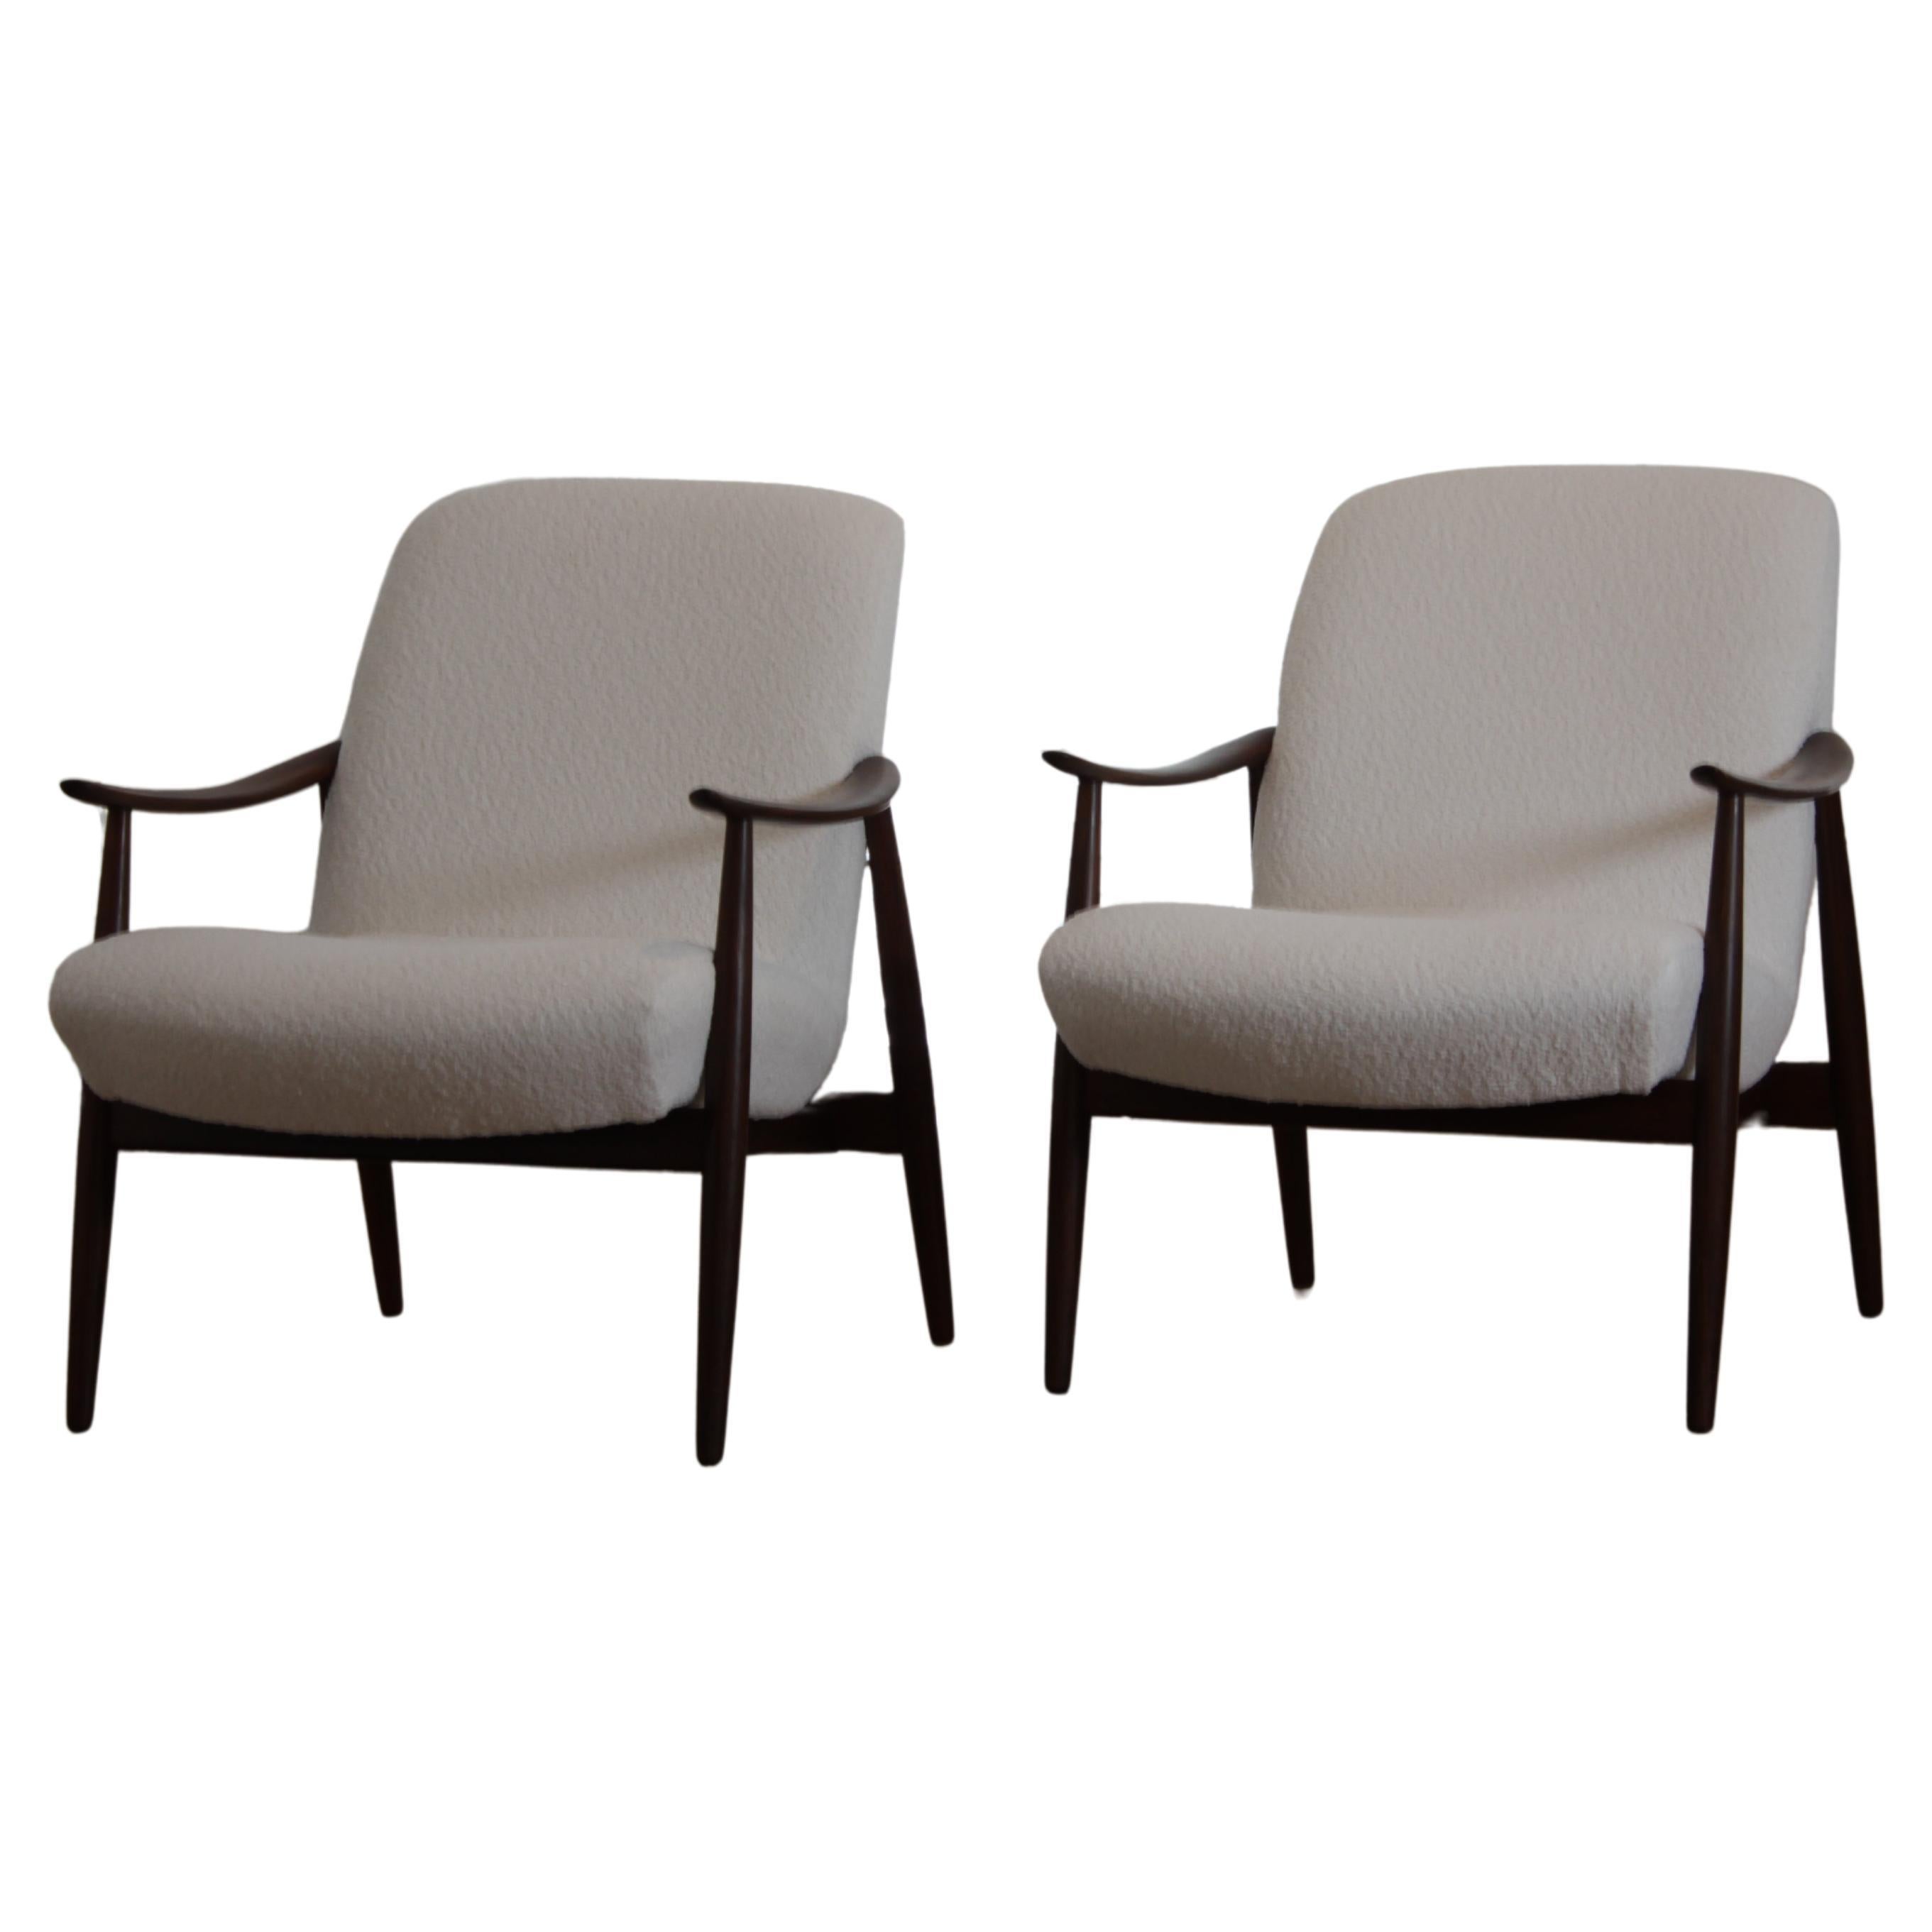 Mid 20th Century Modern Pair of Armchairs by Ingmar Relling for Westnofa, 1960s